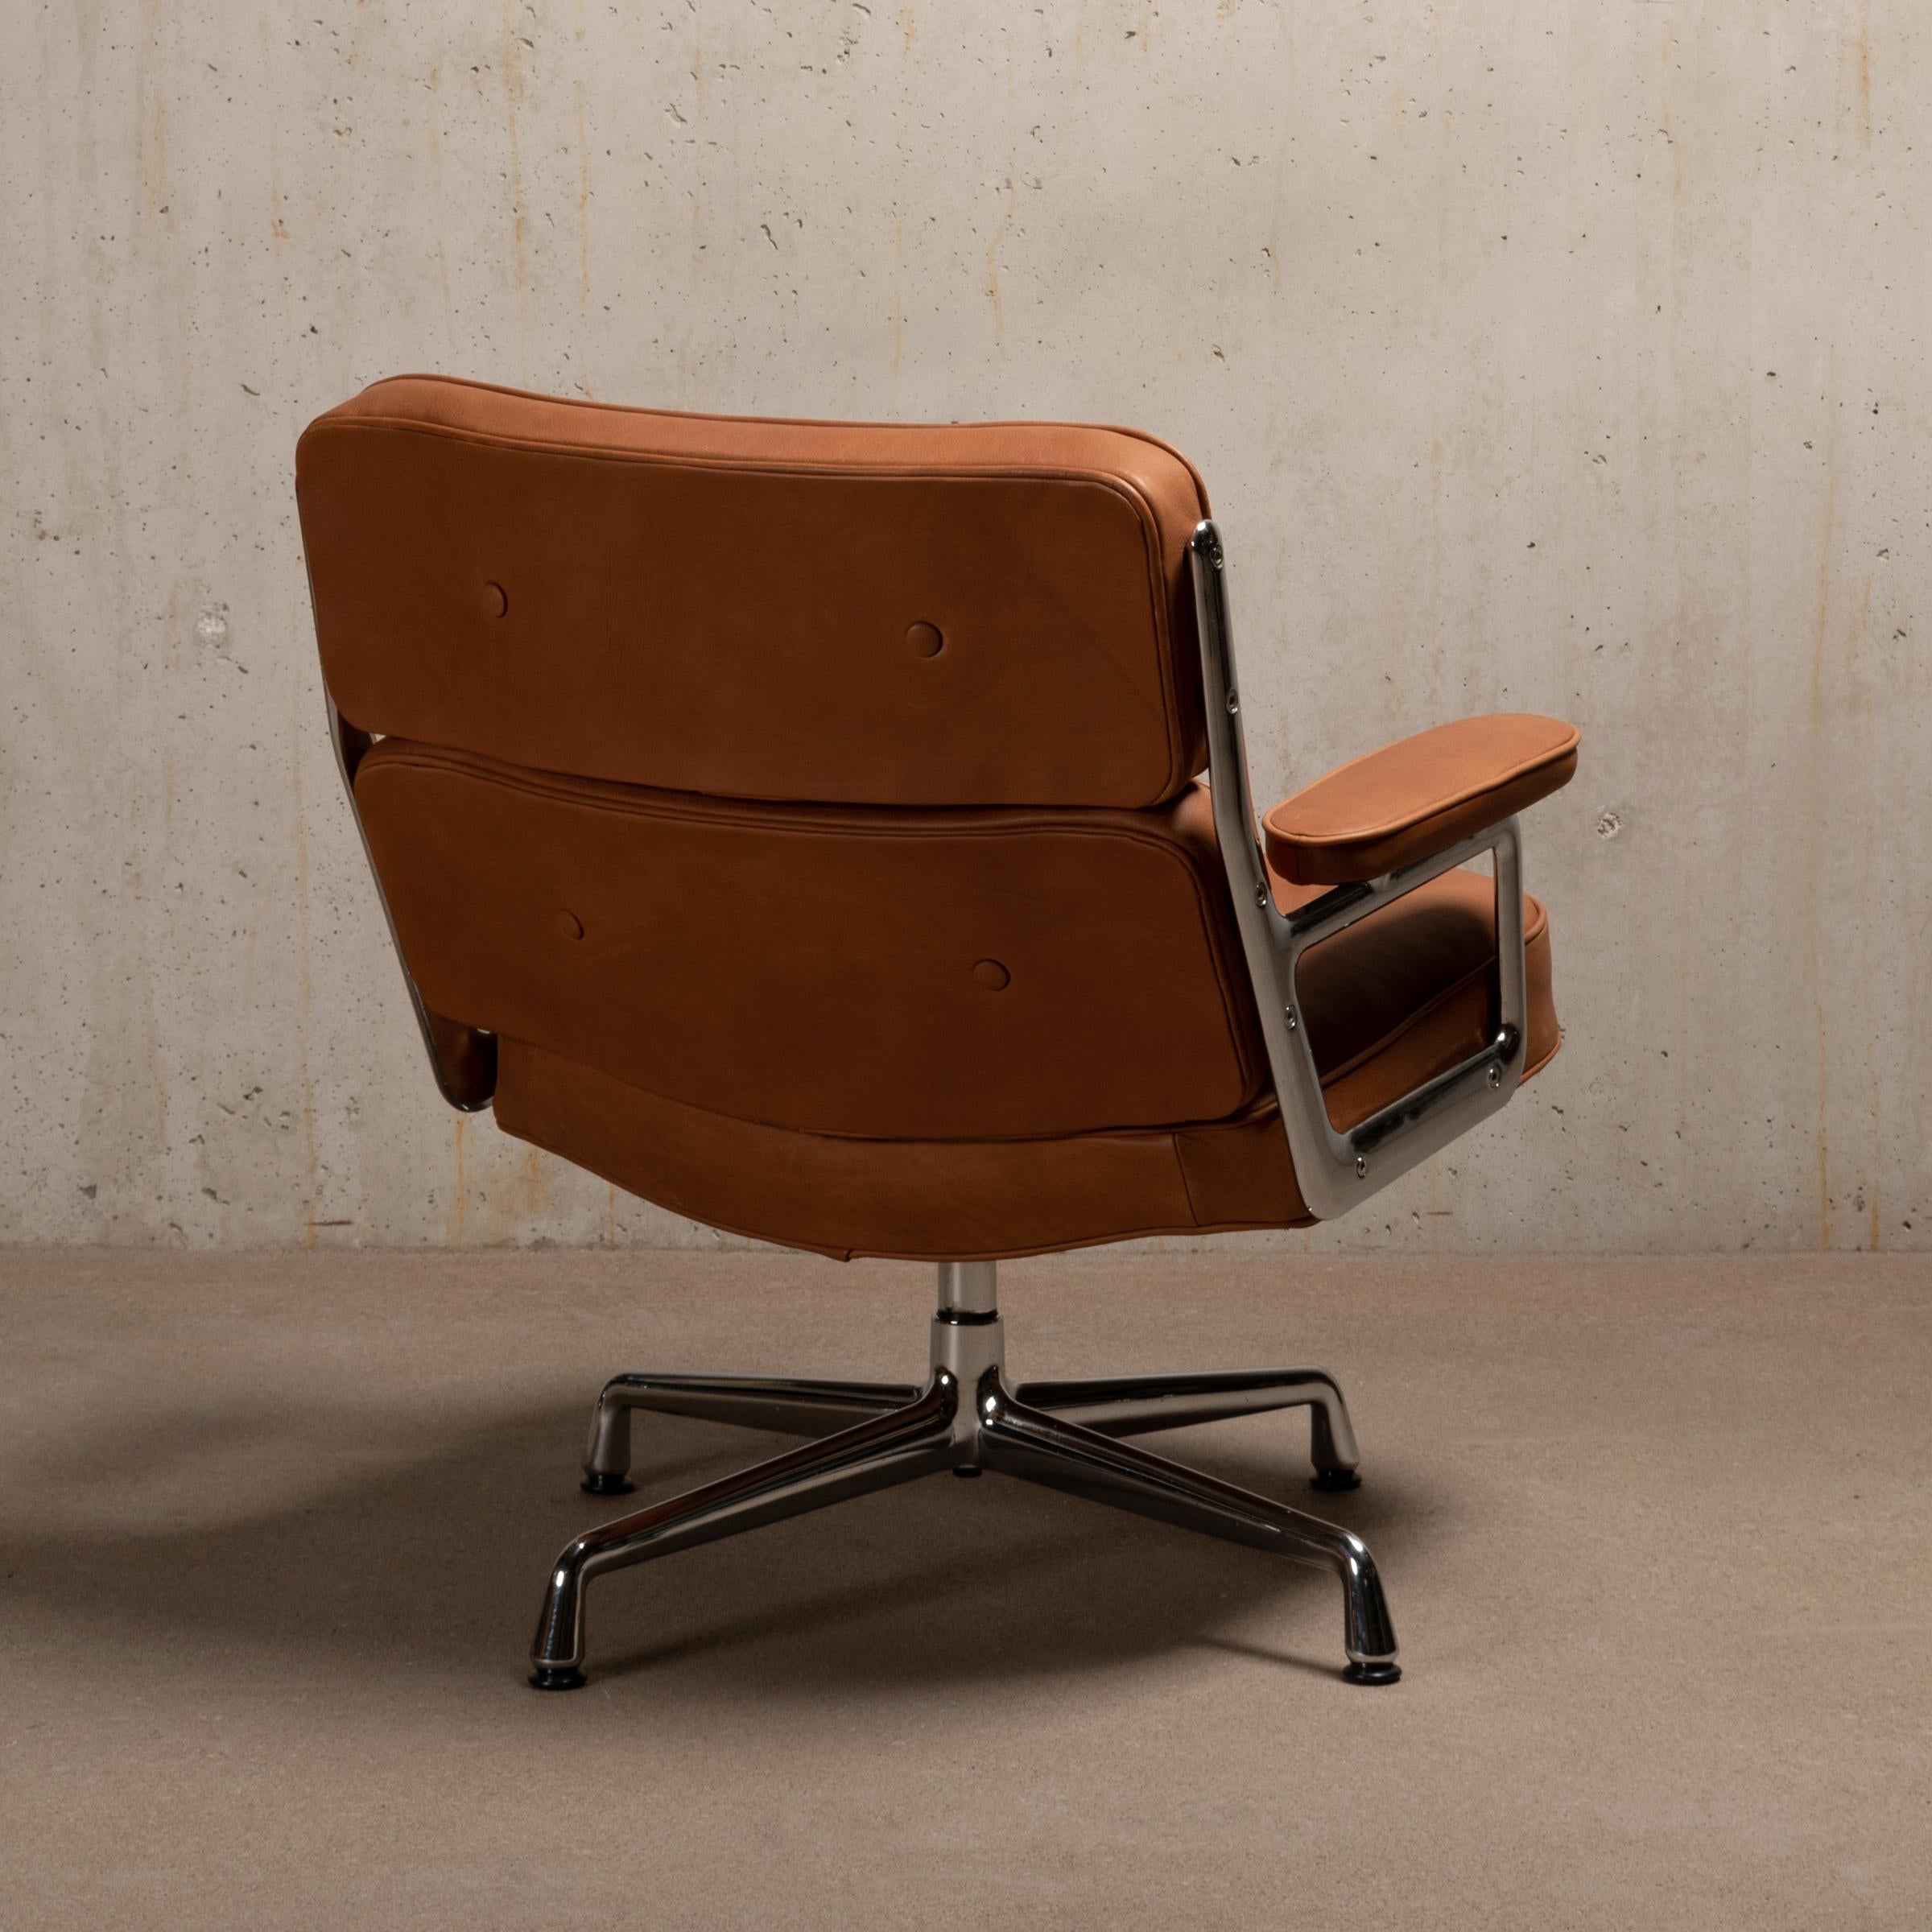 Charles & Ray Eames ES105 Lobby Chairs in Cognac Leather by Vitra 1